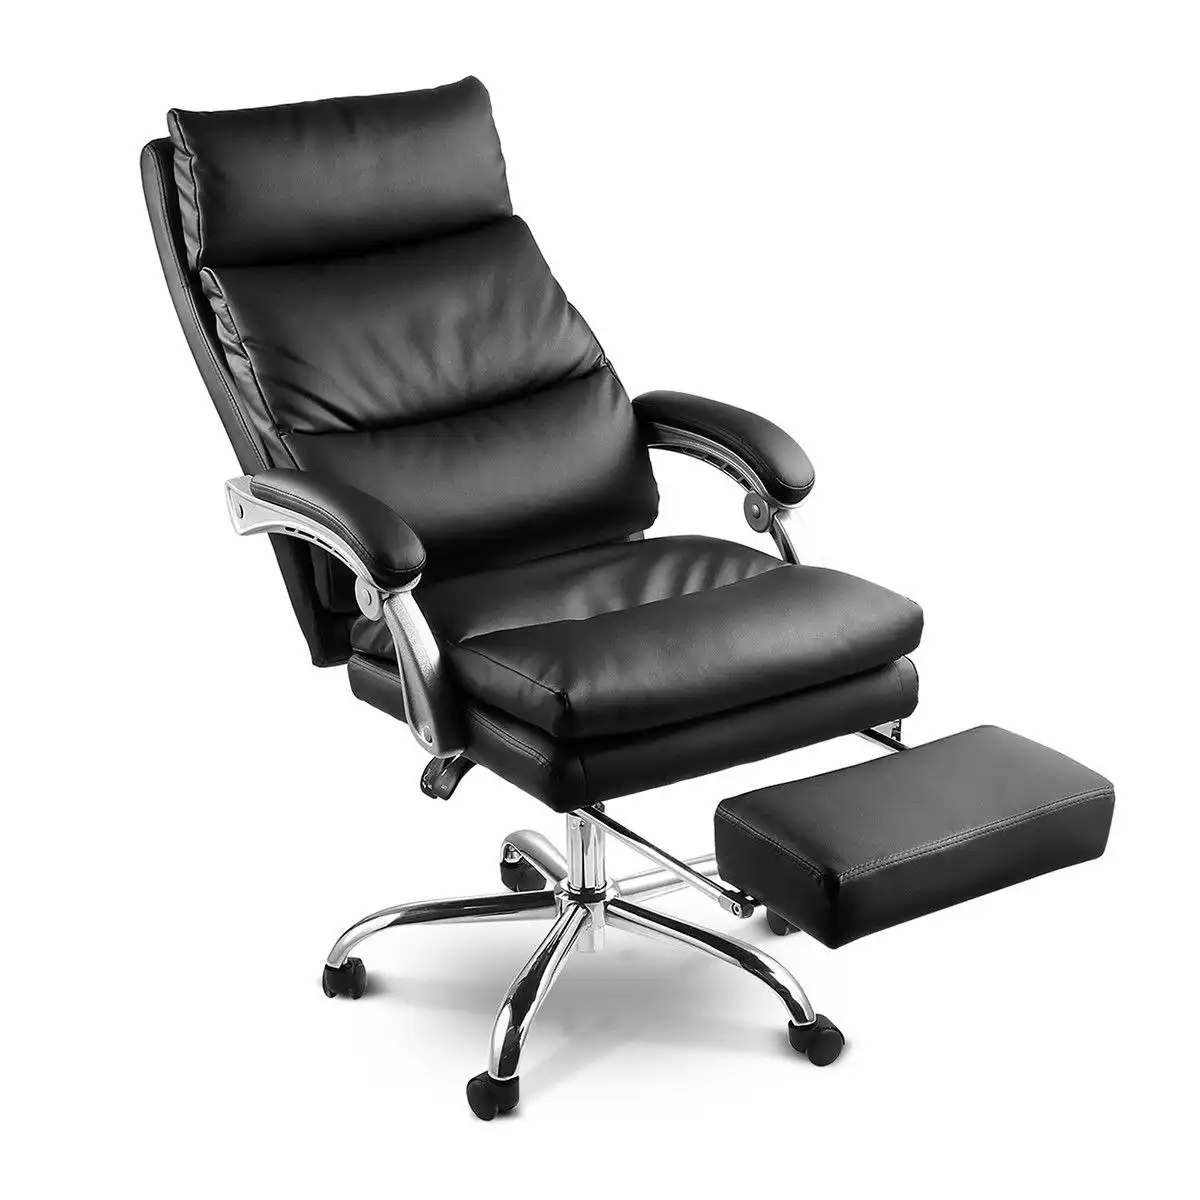 Neader Deluxe Adjustable Ergonomic PU Leather Office Chair with Footrest